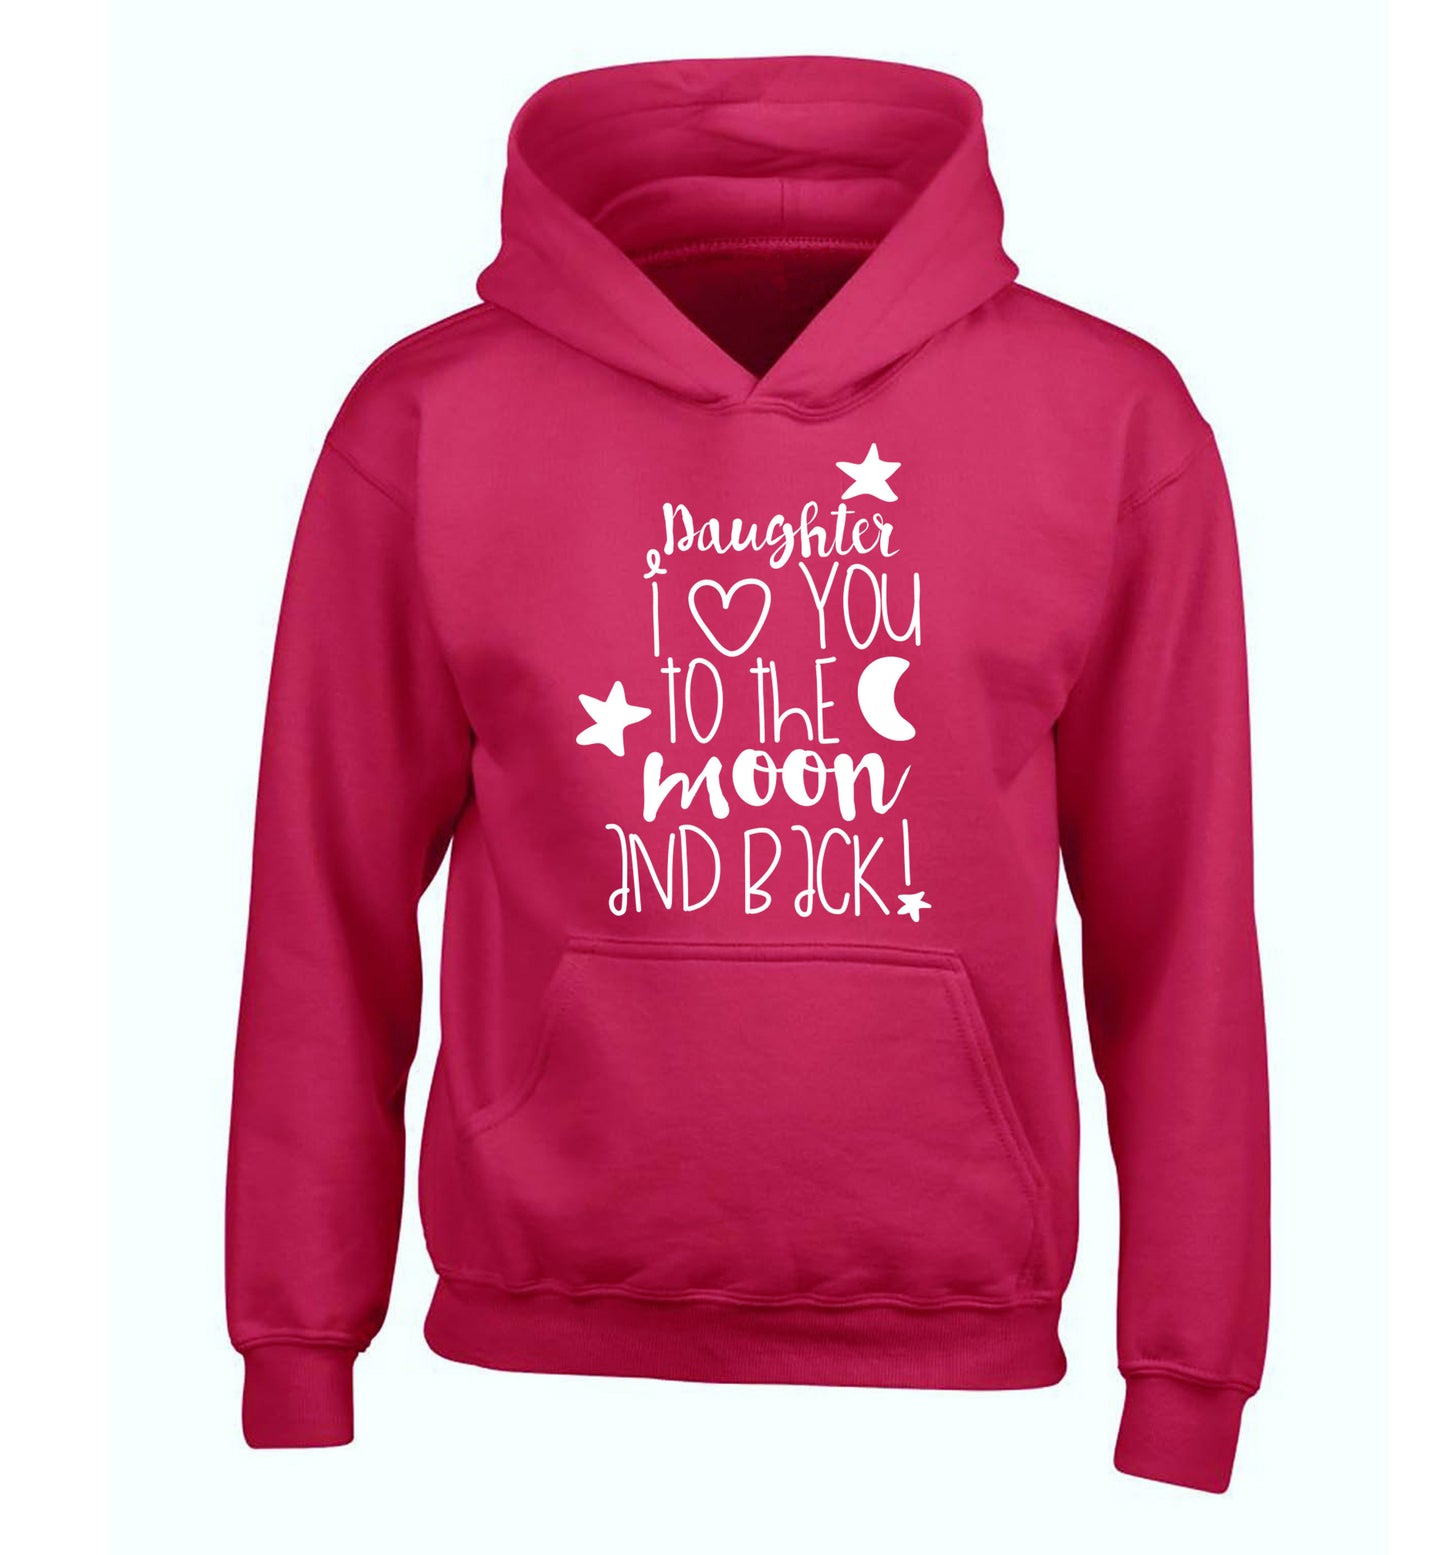 Daughter I love you to the moon and back children's pink hoodie 12-14 Years